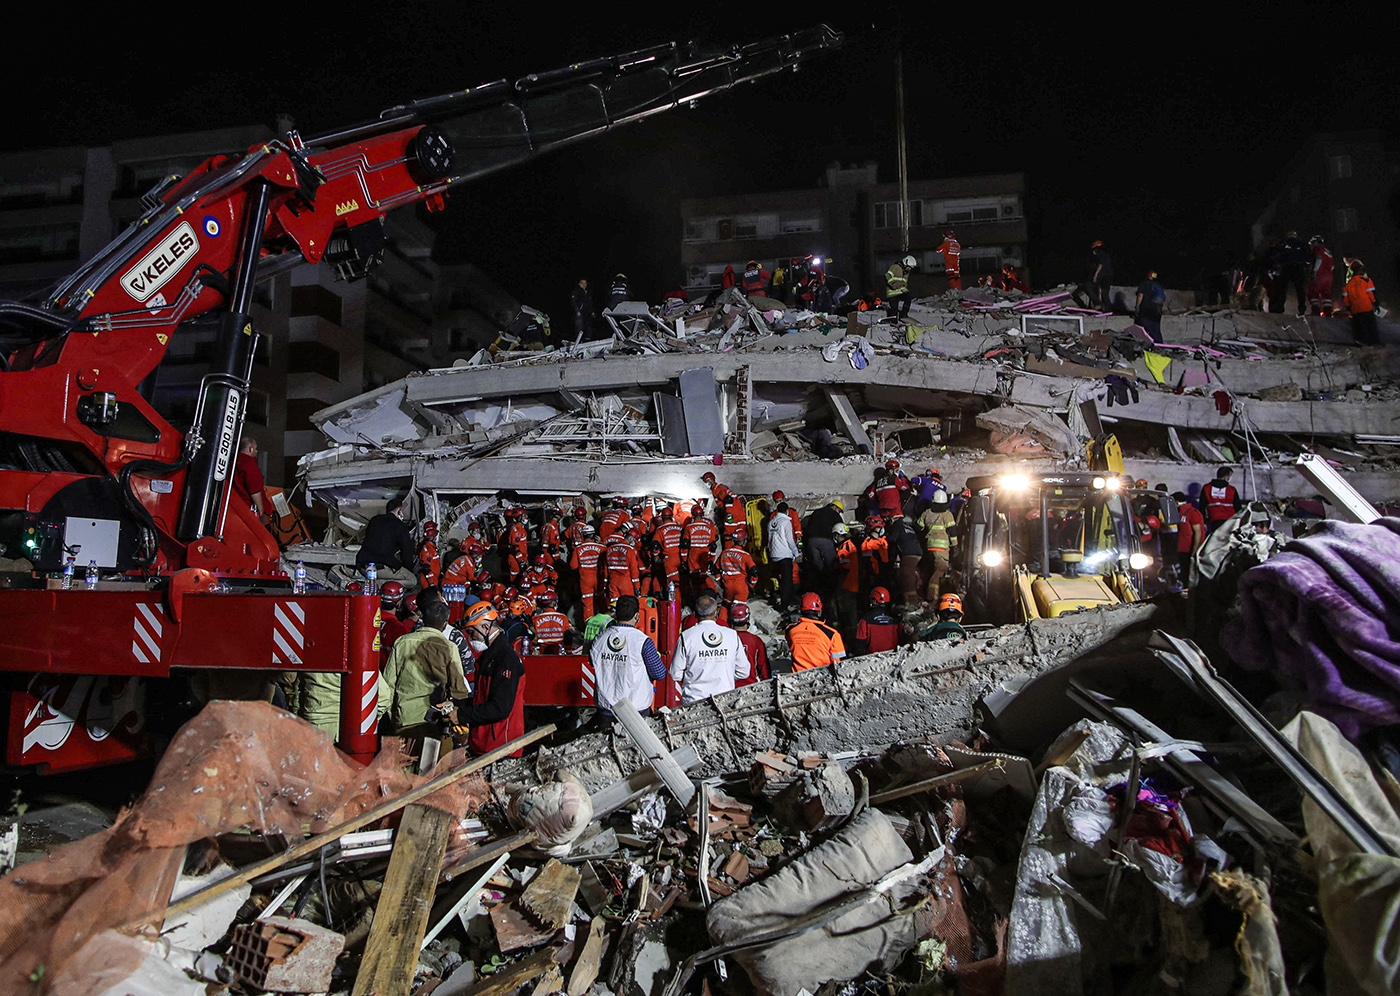 Rescue workers and people search for survivors at a collapsed building after a 7.0 magnitude earthquake in the Aegean Sea, at Bayrakli district in Izmir, Turkey, 30 October 2020. According to Turkish media reports, at least twelve people died while more than six hundreds were injured and dozens of buildings were destroyed in the earthquake.  EPA-EFE/ERDEM SAHIN